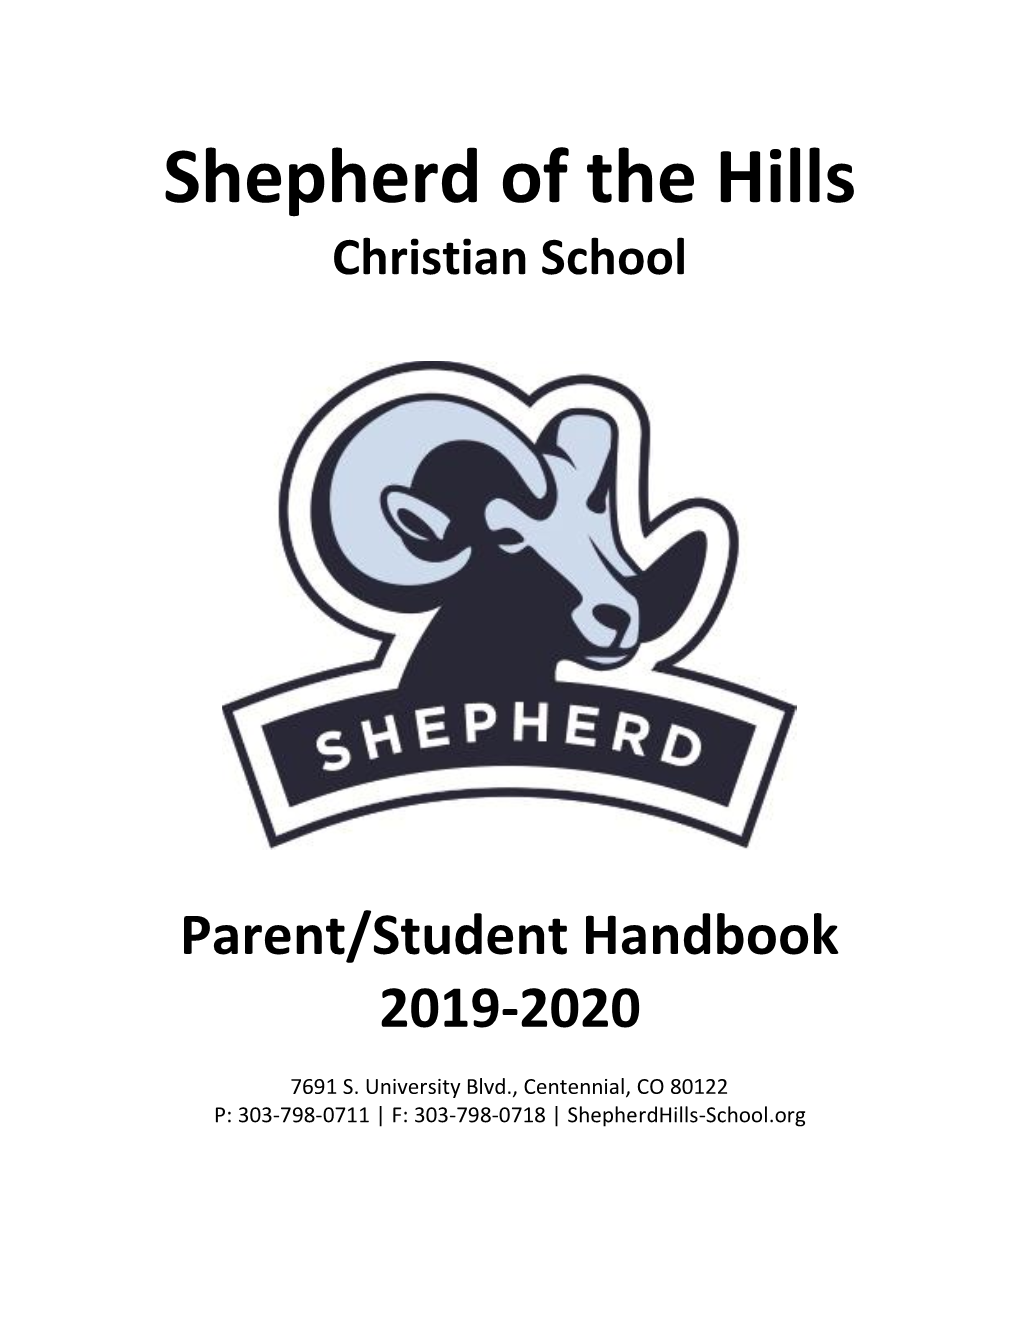 About Shepherd of the Hills Christian School